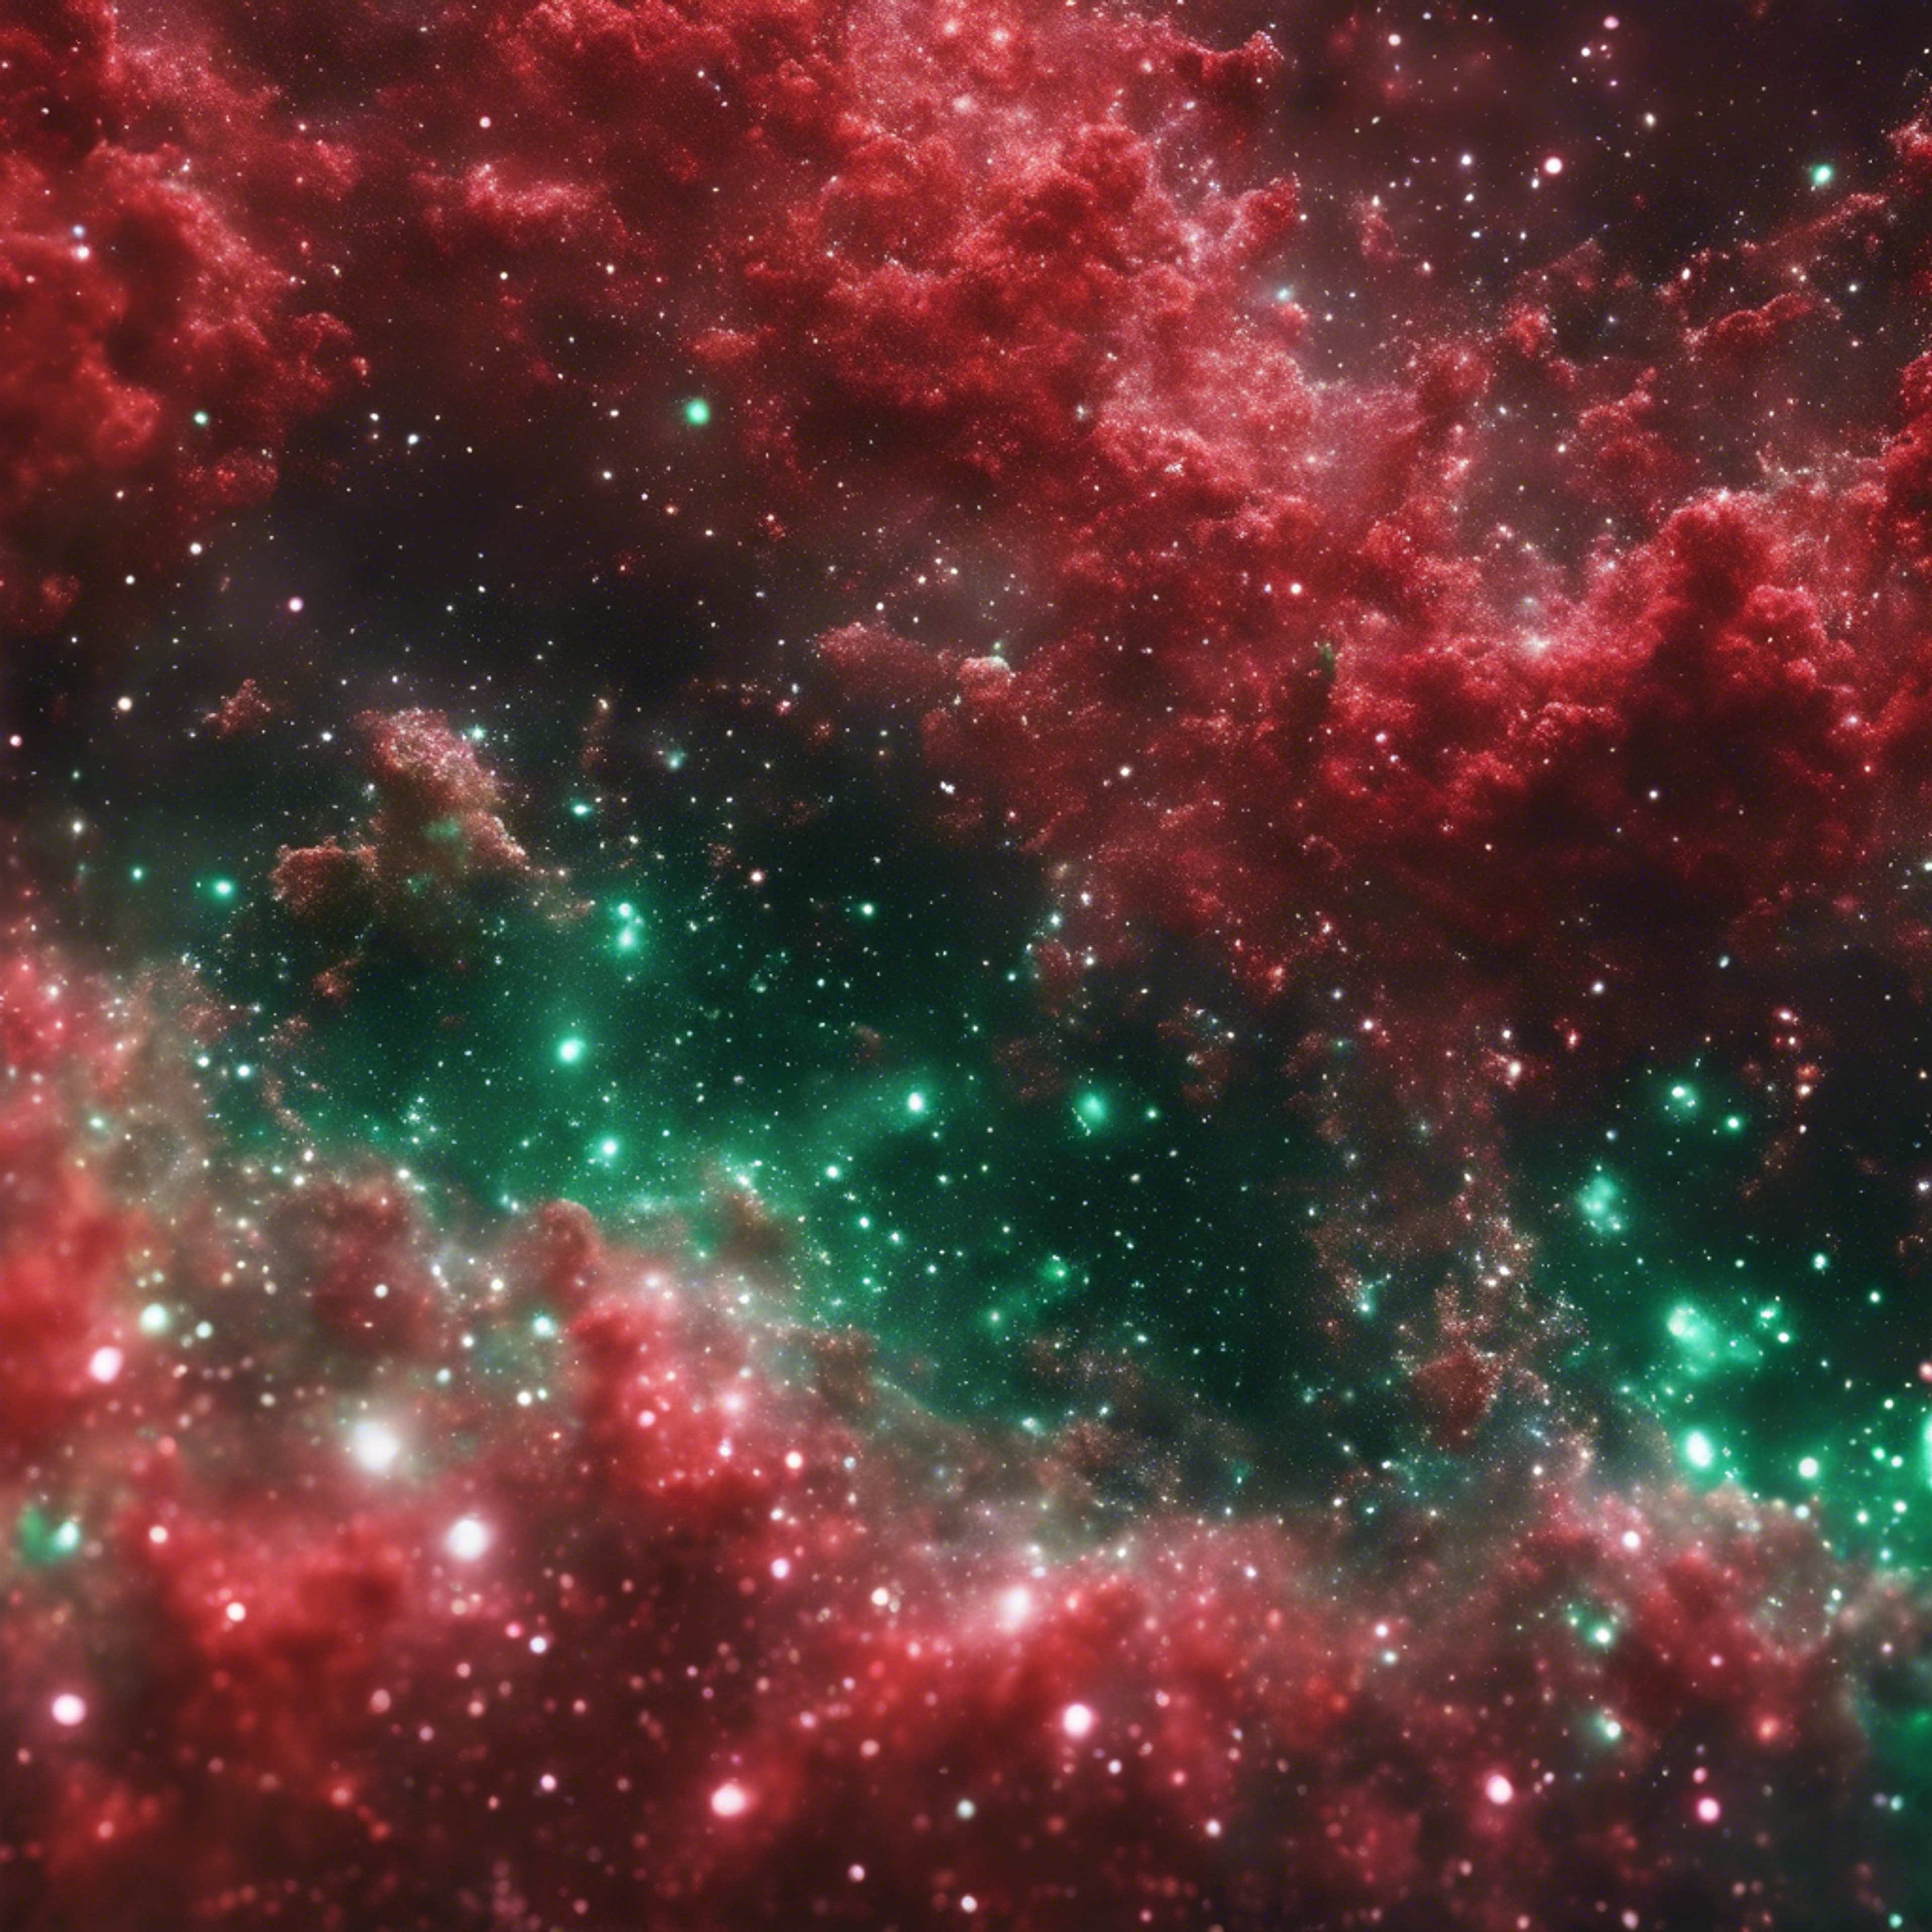 Red and green glitter spread like a nebula in space Валлпапер[56bea9c0023d4b1f9afc]